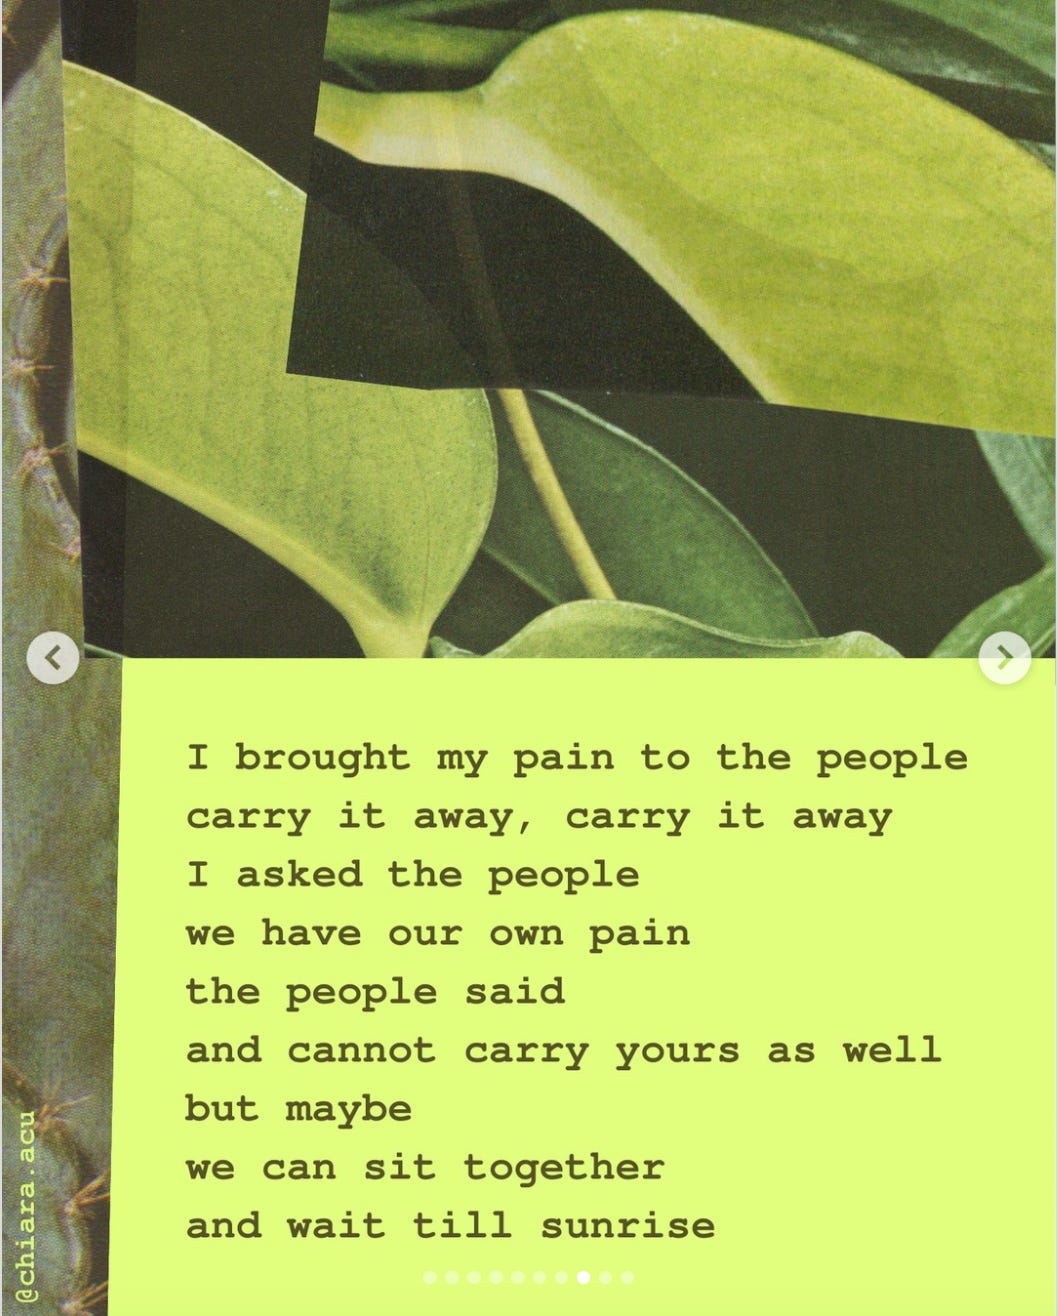 Collage of paper cutouts of green leaves, printed cloth on a pale neon yellow background and brown text. The text reads, "I brought my pain to the people. carry it away, carry it away i asked the people. we have our own pain the people said and cannot carry yours as well. but maybe we can sit together and wait till sunrise"